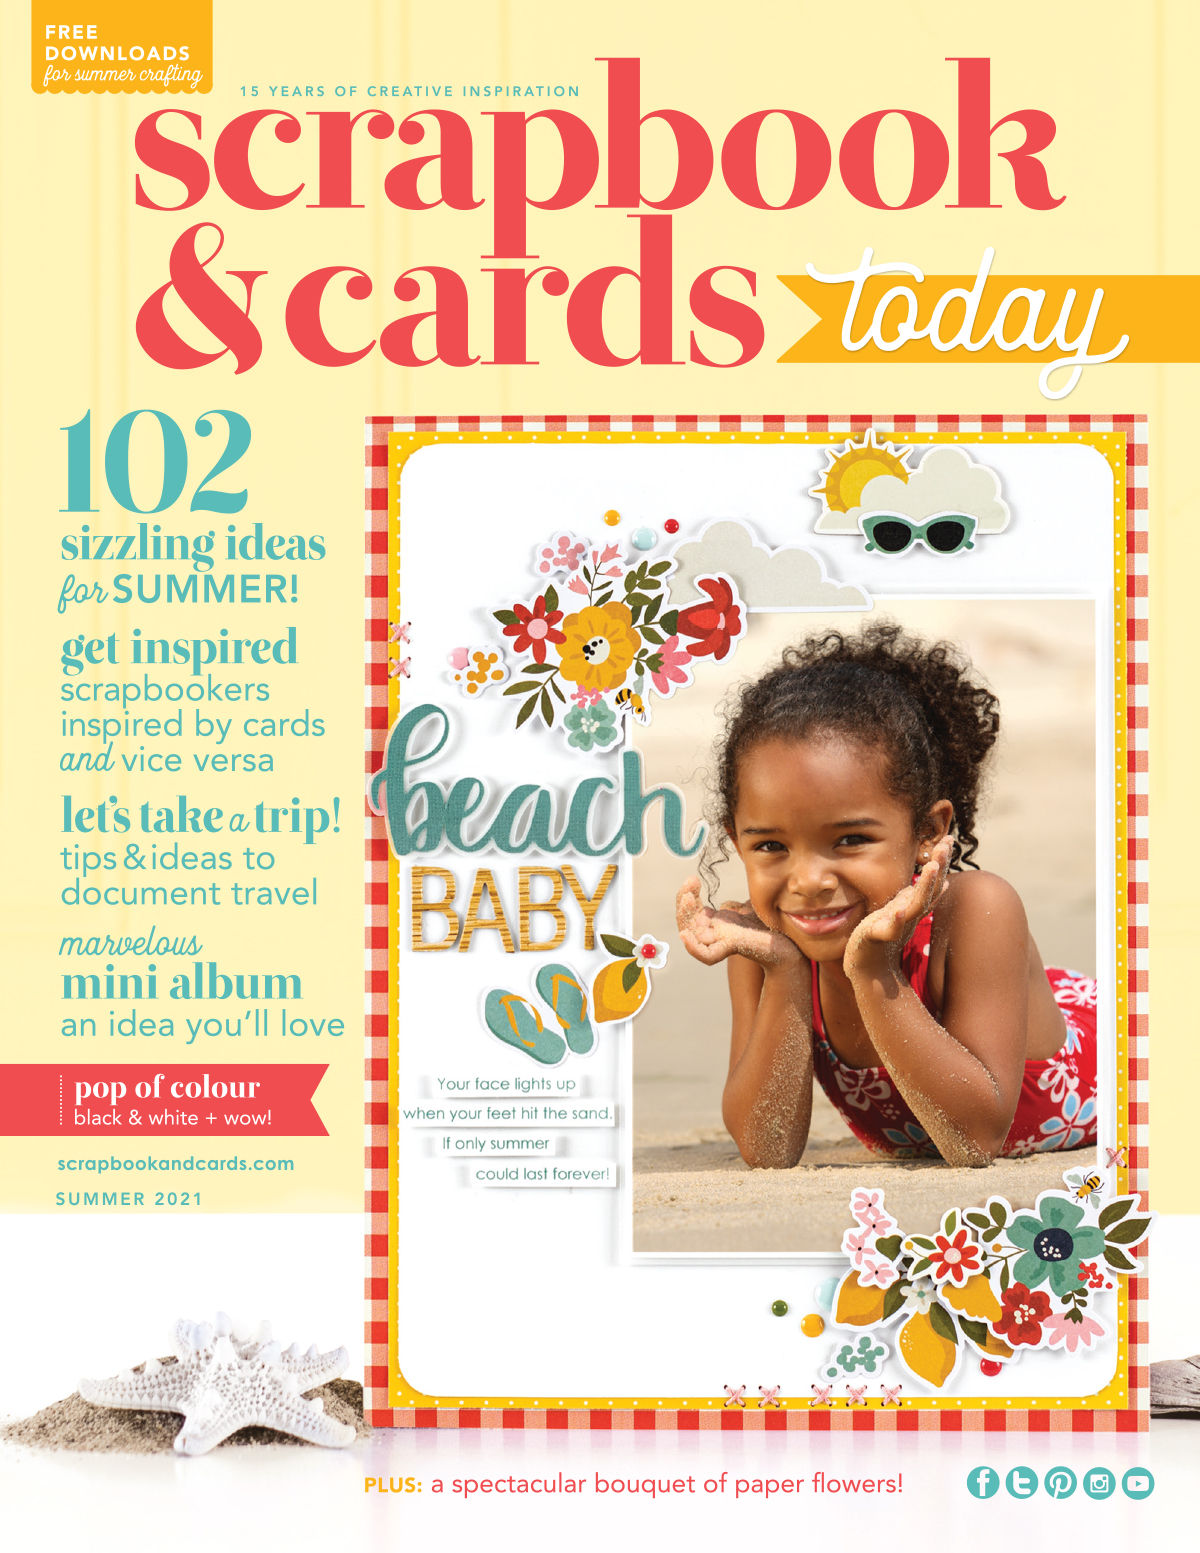 Scrapbook & Cards Today - Summer 2021 Issue